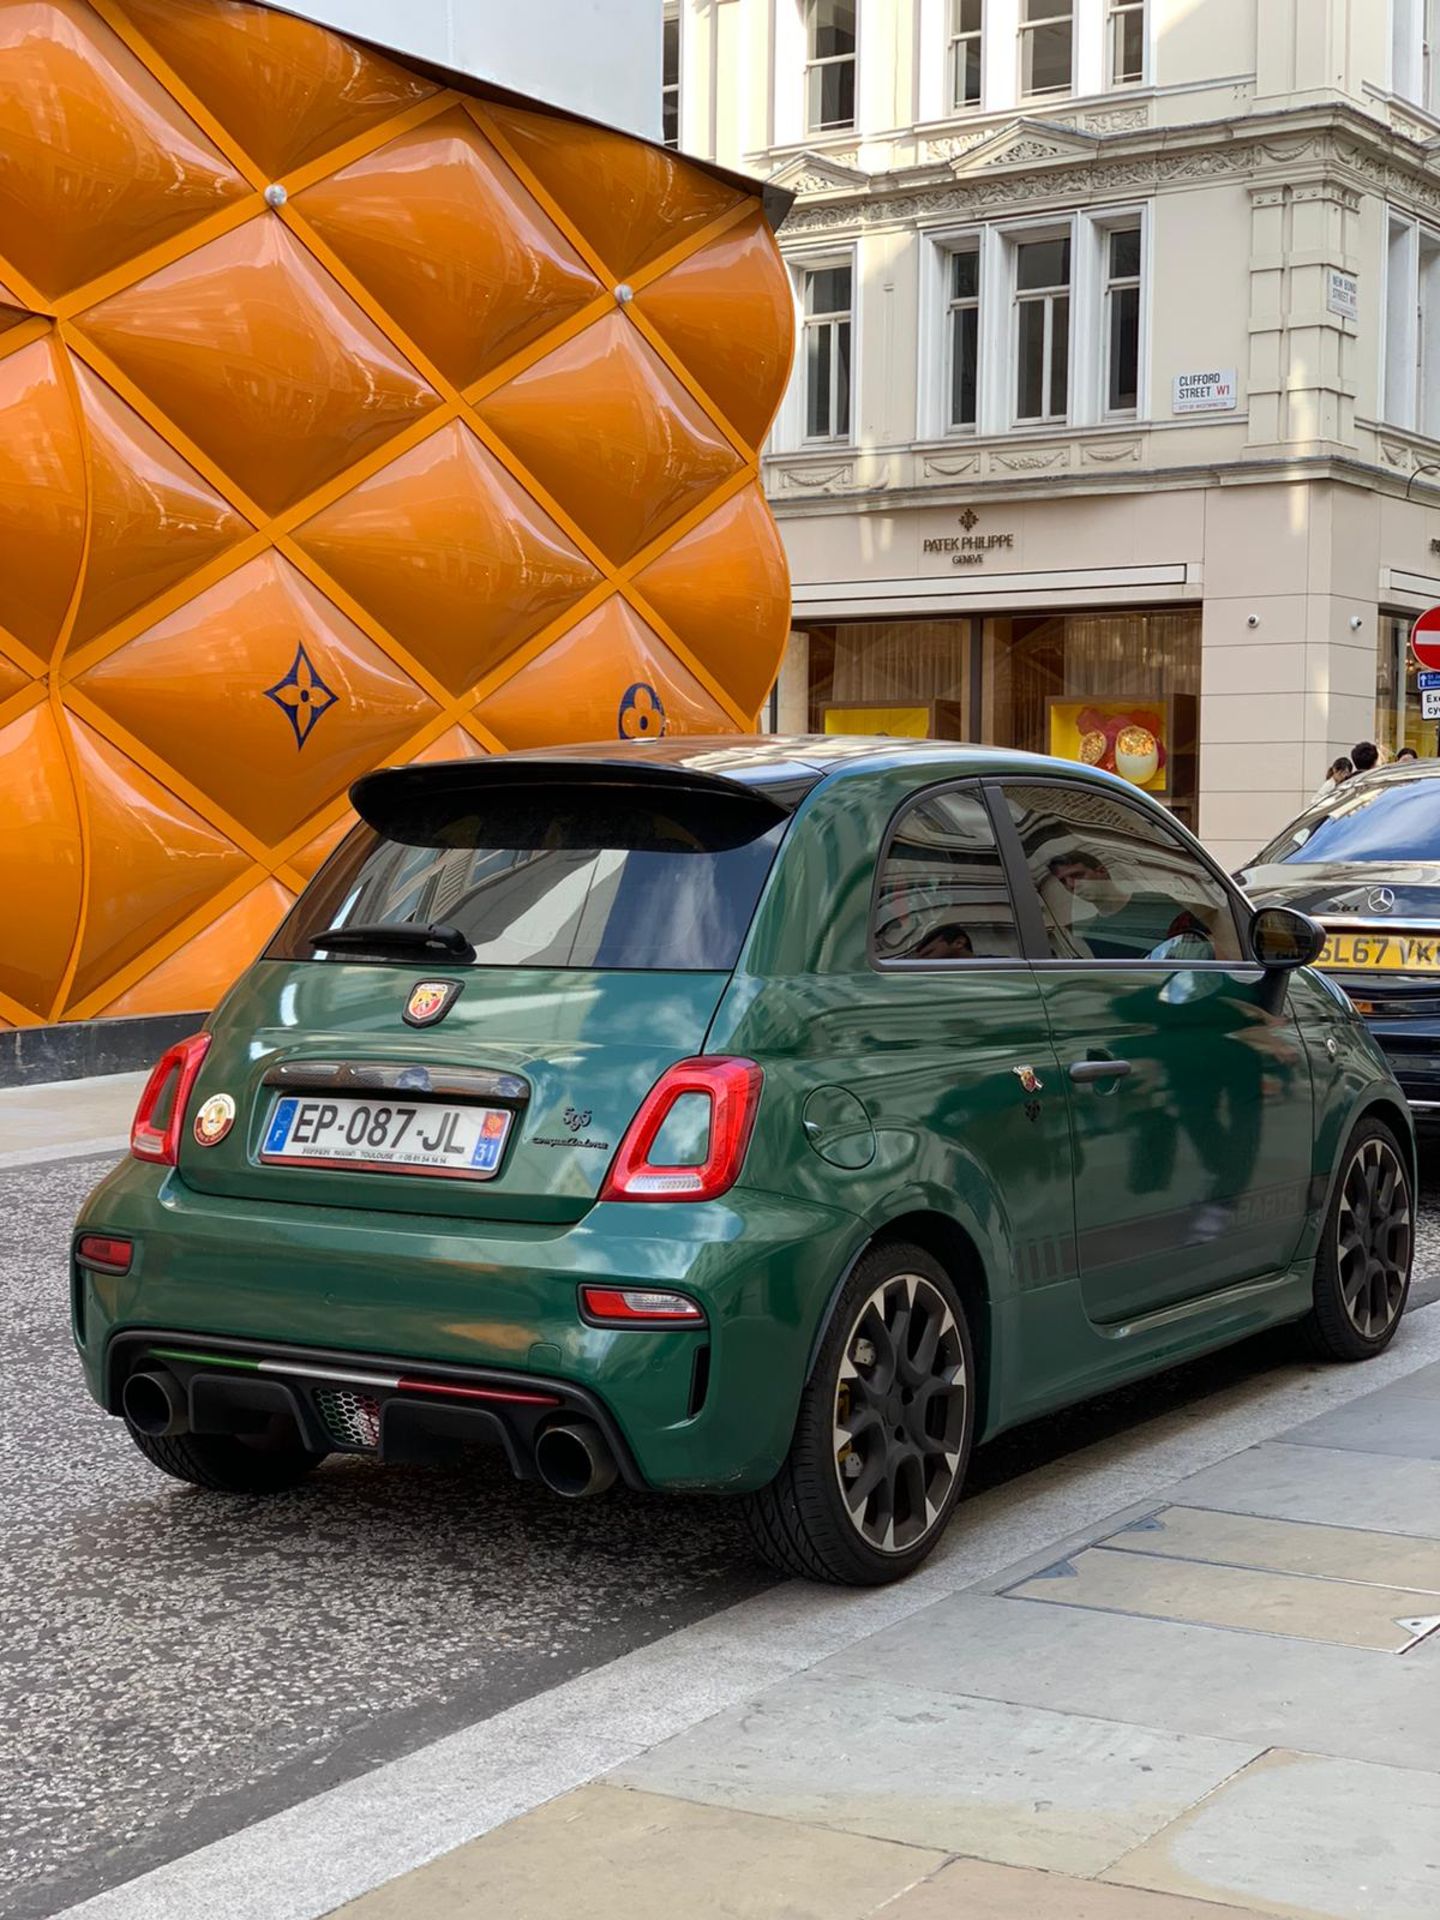 ABARTH 595 COMP 2016, 10,000 MILES NO ACCIDENTS, CUSTOM EXHAUST, WRAPPED DARK GREEN, FRENCH PLATES - Image 3 of 5